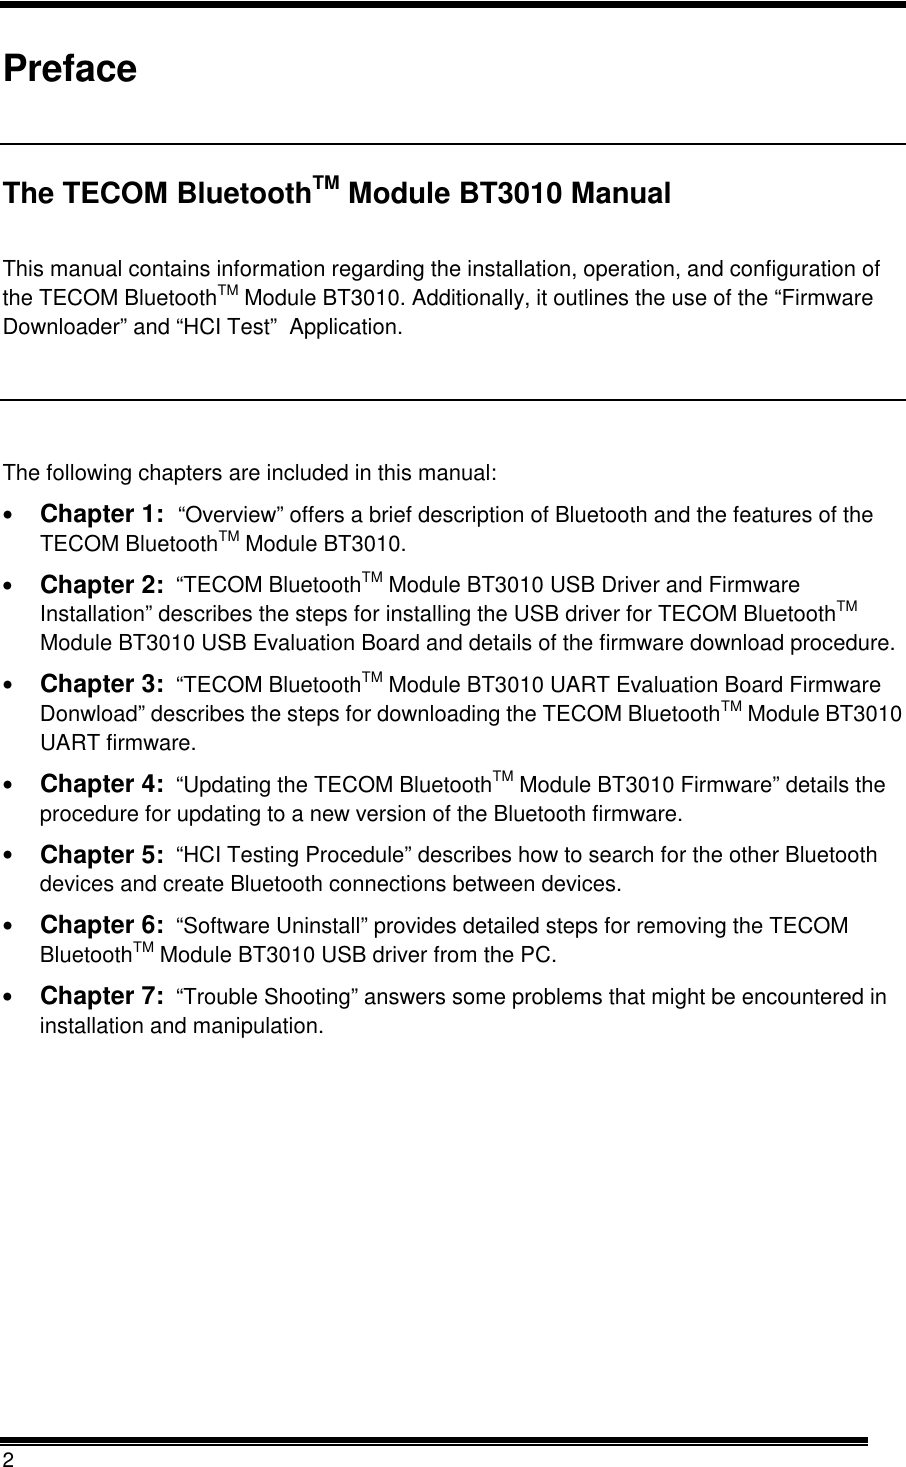  2  Preface  The TECOM BluetoothTM Module BT3010 Manual  This manual contains information regarding the installation, operation, and configuration of the TECOM BluetoothTM Module BT3010. Additionally, it outlines the use of the “Firmware Downloader” and “HCI Test”  Application.  The following chapters are included in this manual: •  Chapter 1:  “Overview” offers a brief description of Bluetooth and the features of the TECOM BluetoothTM Module BT3010. •  Chapter 2:  “TECOM BluetoothTM Module BT3010 USB Driver and Firmware Installation” describes the steps for installing the USB driver for TECOM BluetoothTM Module BT3010 USB Evaluation Board and details of the firmware download procedure. •  Chapter 3:  “TECOM BluetoothTM Module BT3010 UART Evaluation Board Firmware Donwload” describes the steps for downloading the TECOM BluetoothTM Module BT3010 UART firmware.  •  Chapter 4:  “Updating the TECOM BluetoothTM Module BT3010 Firmware” details the procedure for updating to a new version of the Bluetooth firmware. •  Chapter 5:  “HCI Testing Procedule” describes how to search for the other Bluetooth devices and create Bluetooth connections between devices. •  Chapter 6:  “Software Uninstall” provides detailed steps for removing the TECOM BluetoothTM Module BT3010 USB driver from the PC.  •  Chapter 7:  “Trouble Shooting” answers some problems that might be encountered in installation and manipulation. 